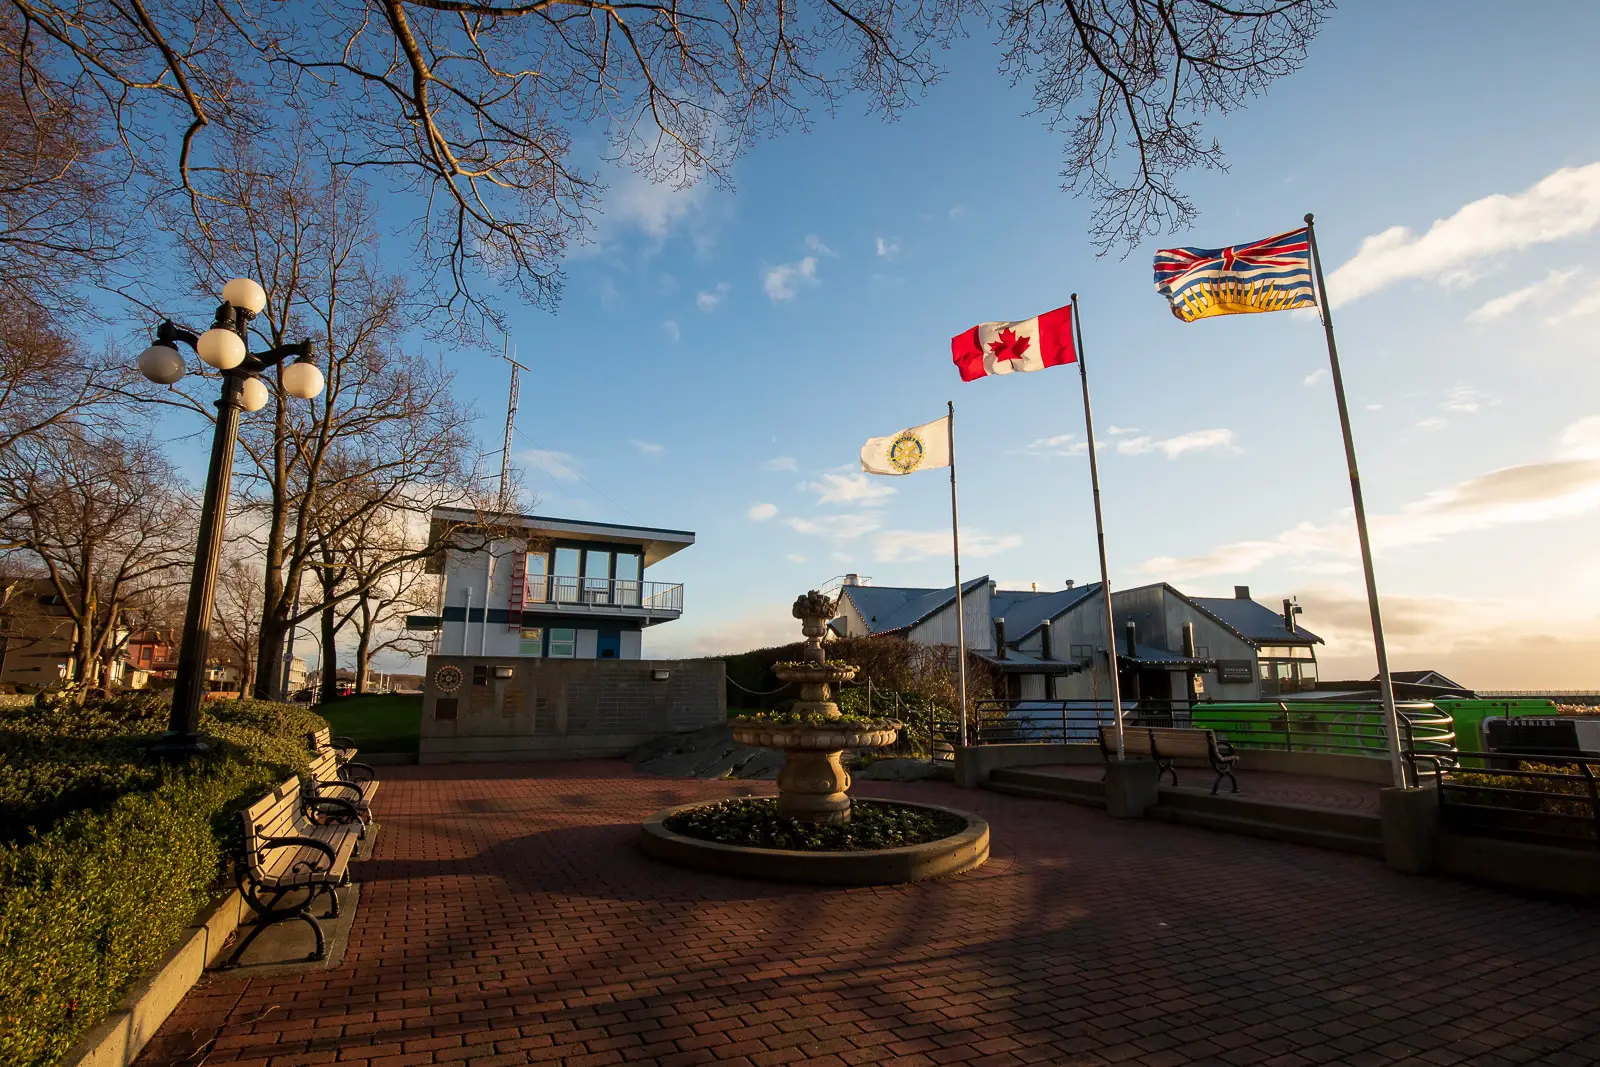 The Rotary International Garden Plaza at The Breakwater District in Victoria